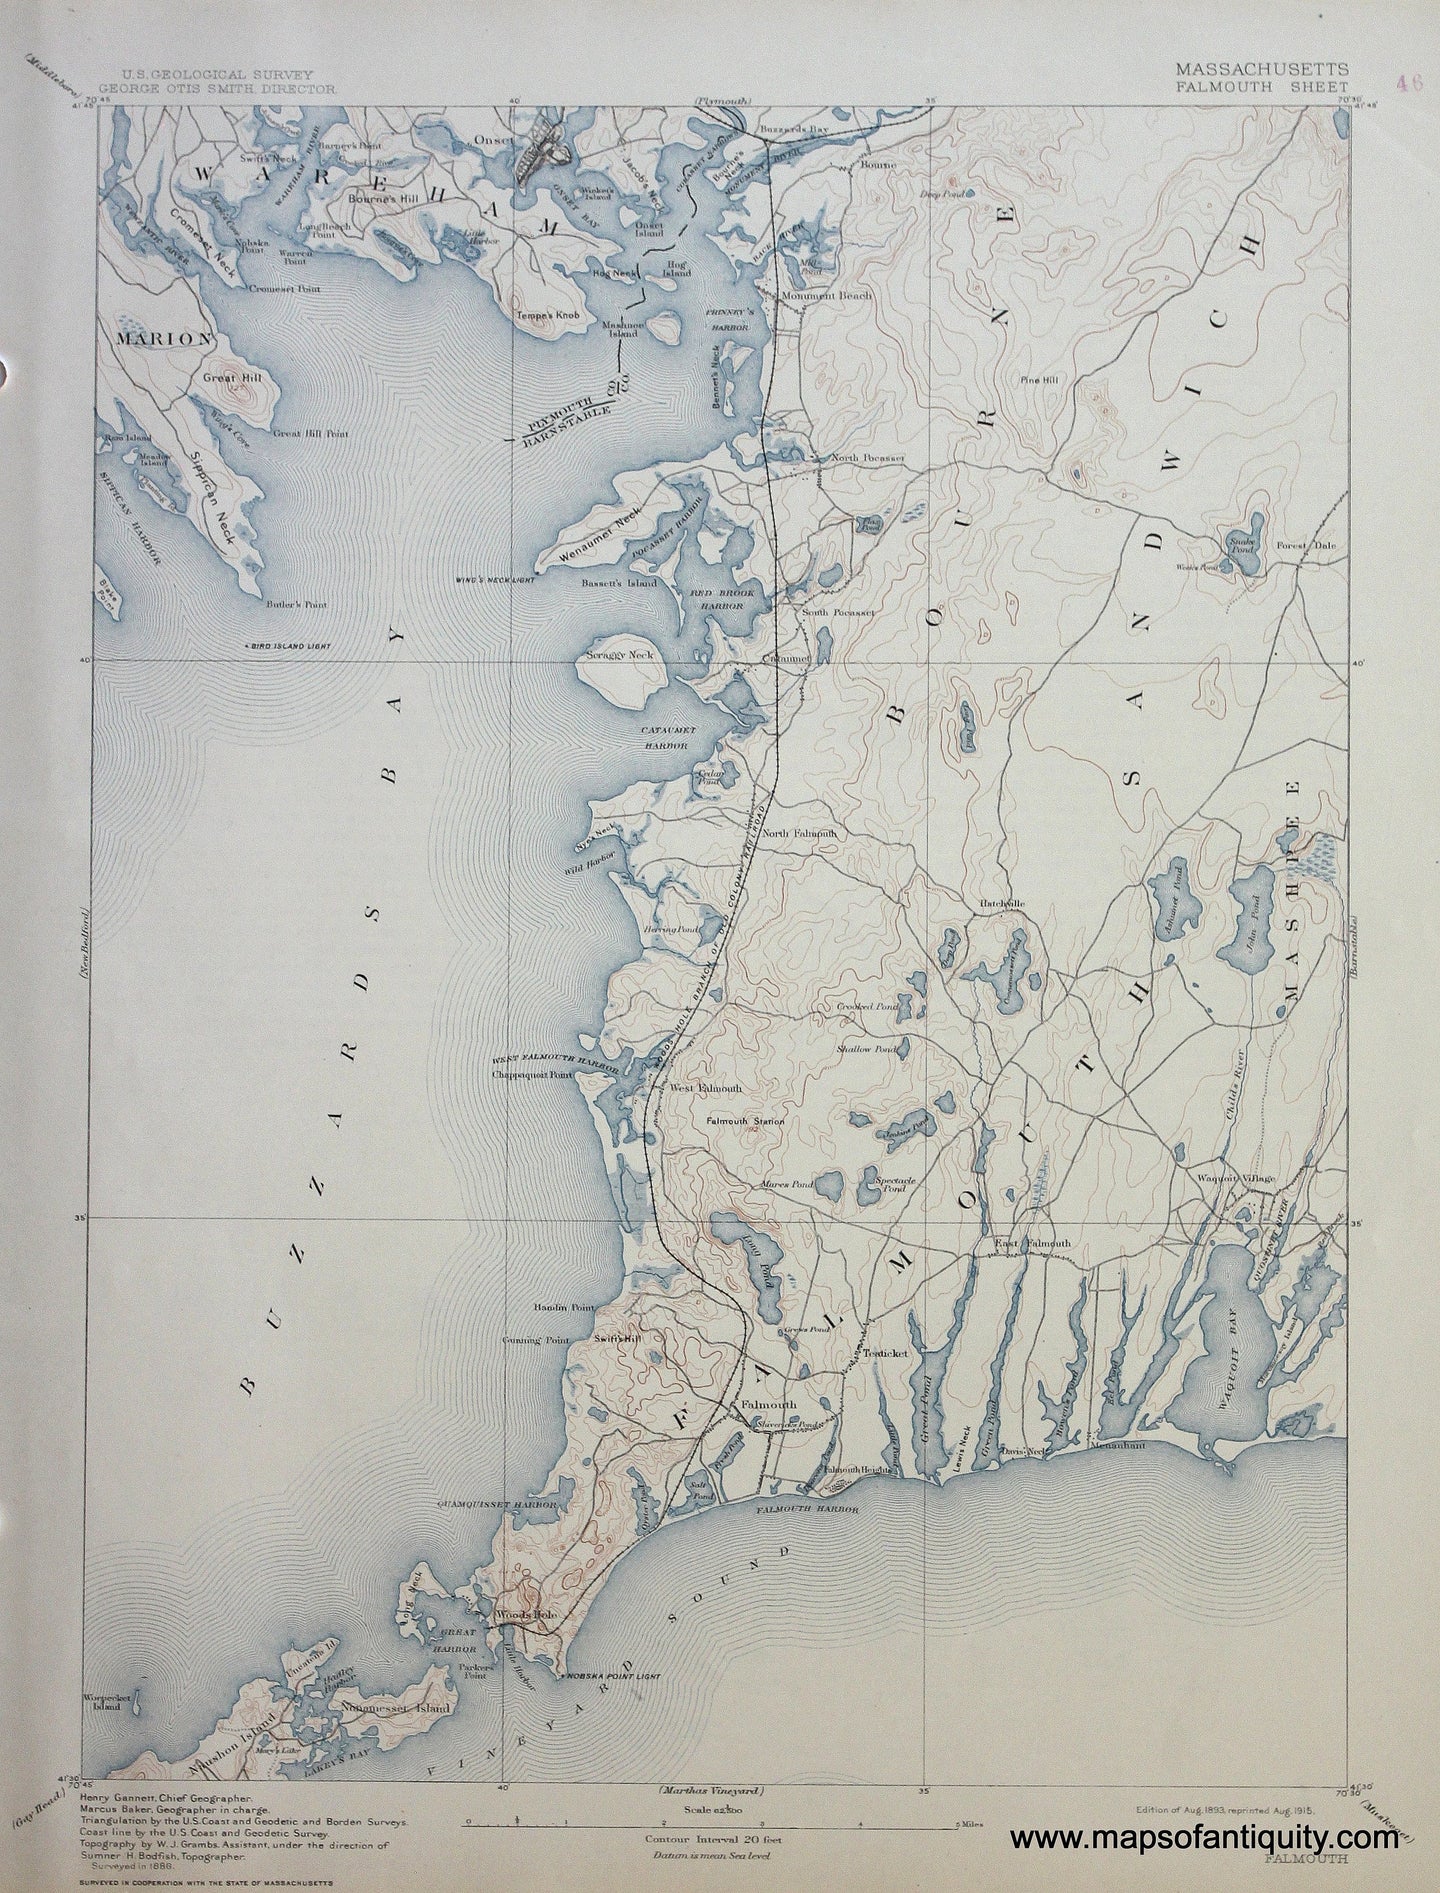 Genuine-Antique-Map-Falmouth-Massachusetts--1915-US-Geological-Survey--Maps-Of-Antiquity